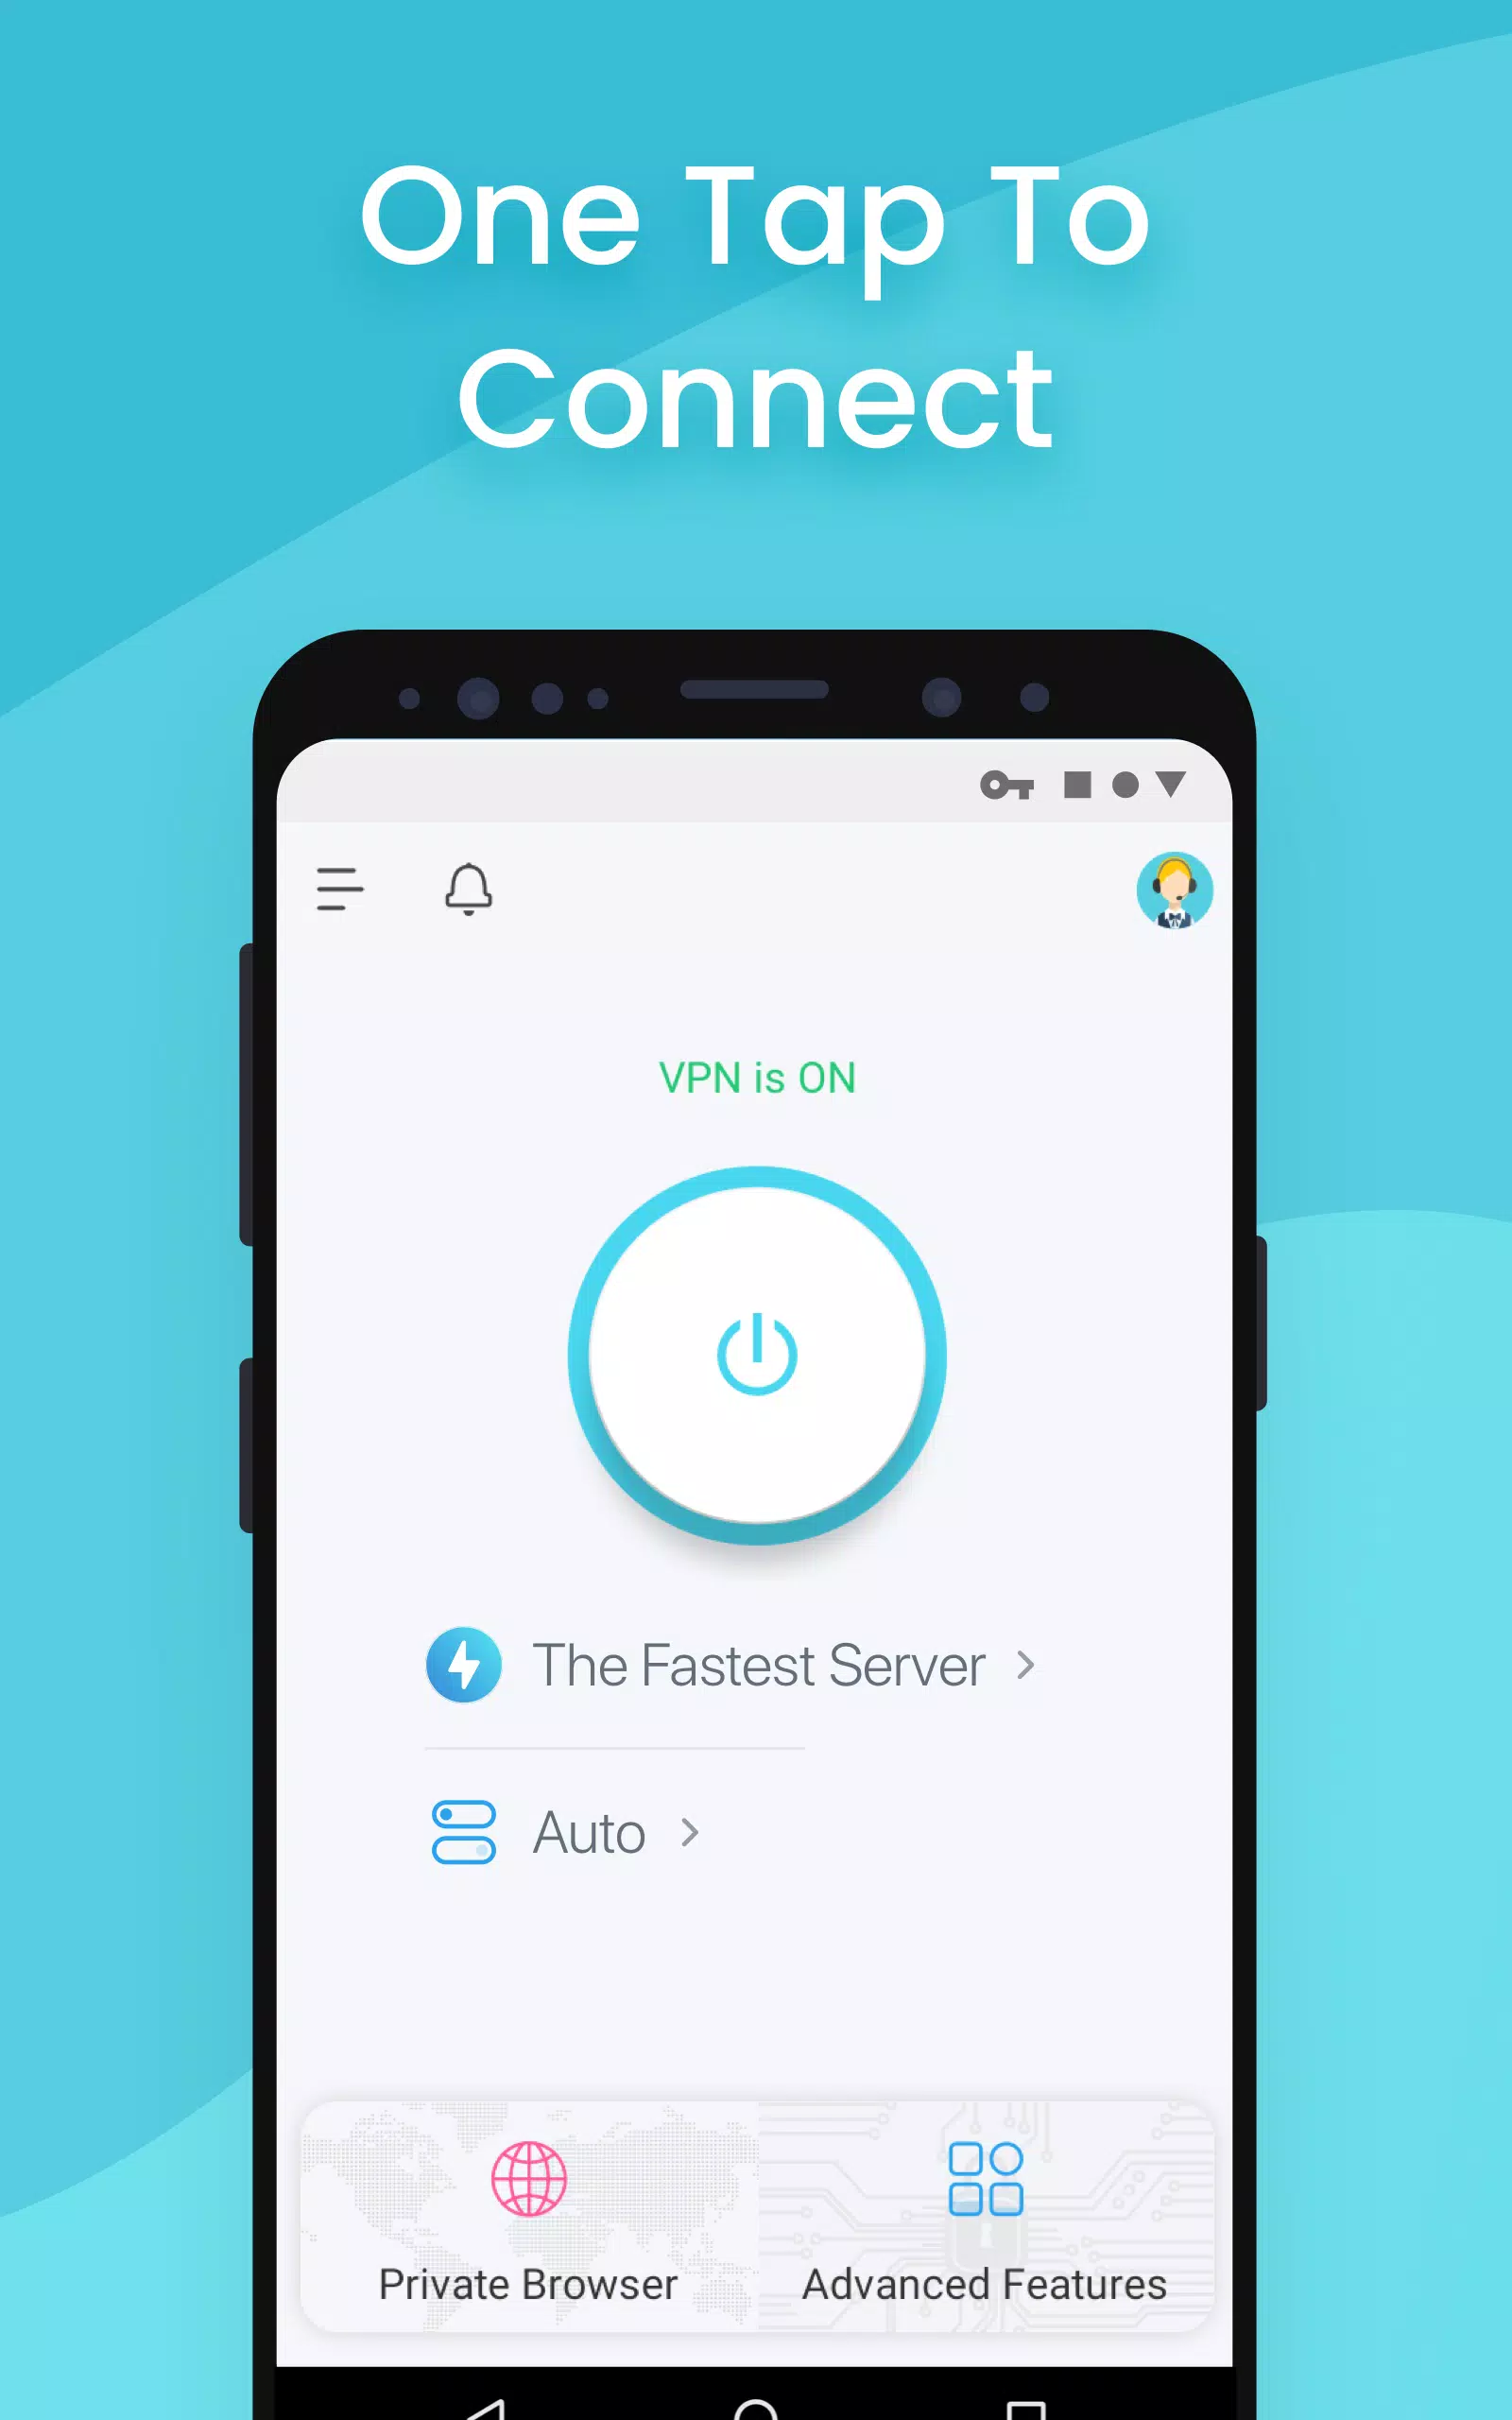 Connect To Fast Network Automatically